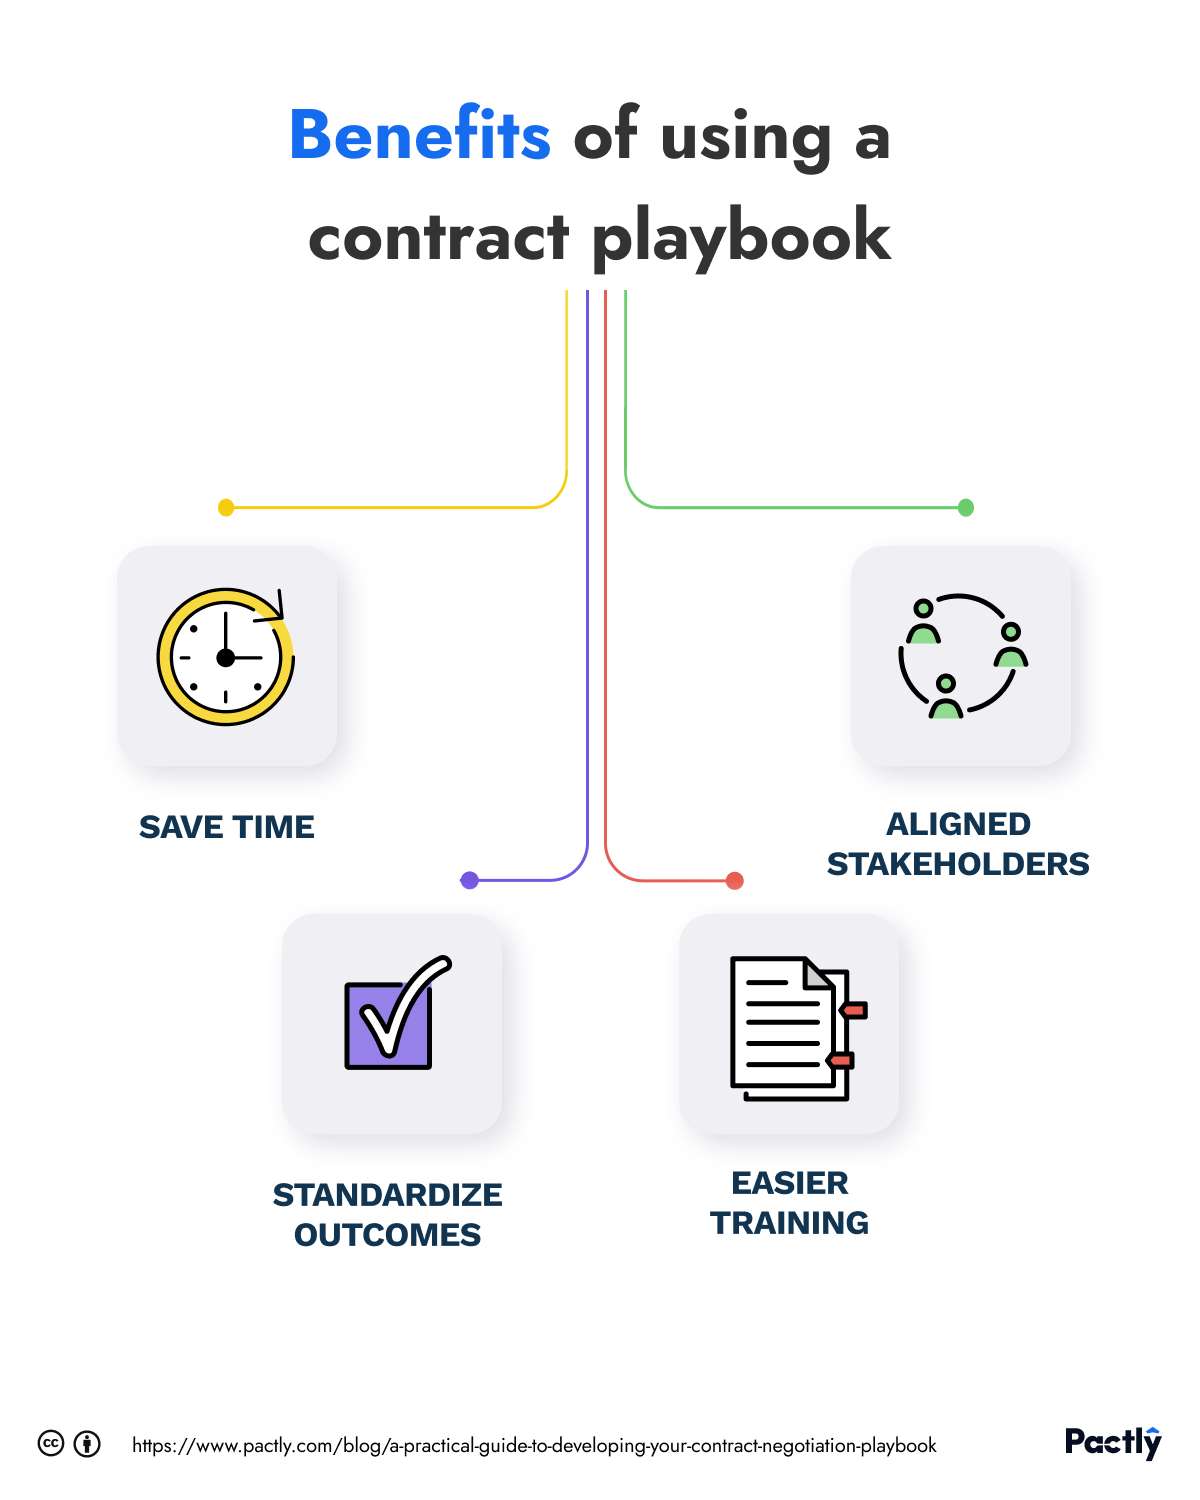 Illustration of benefits of using a contract playbook